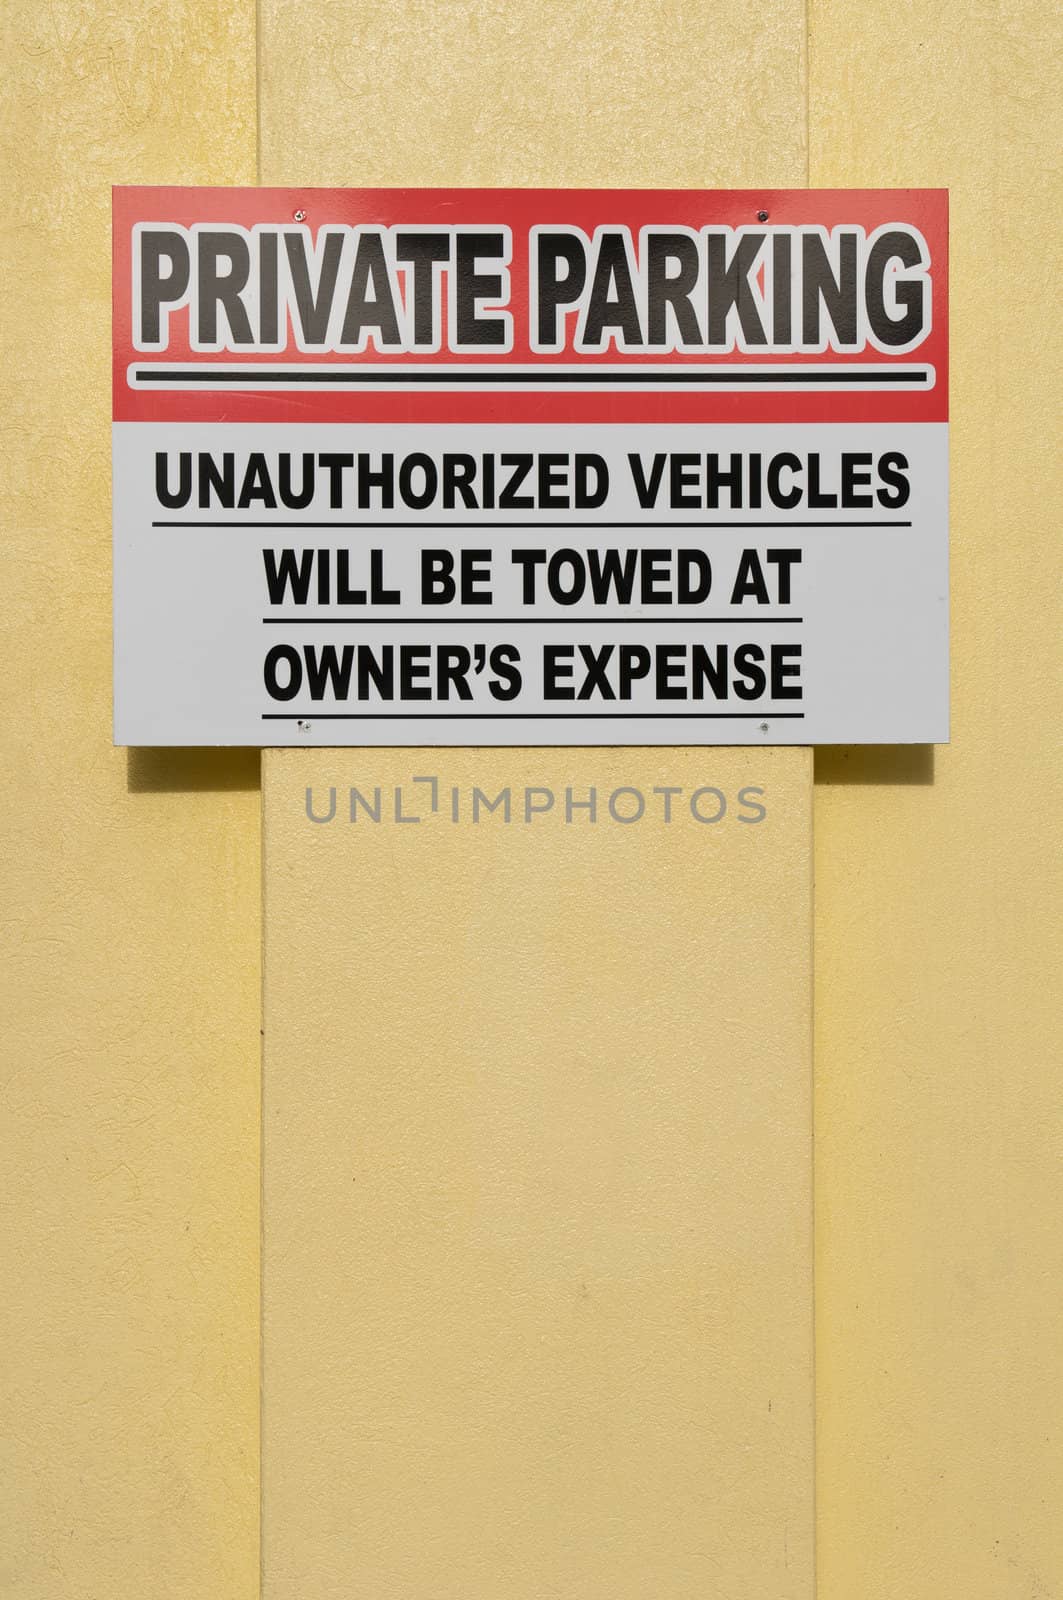 private parking sign hanging on a yellow wall